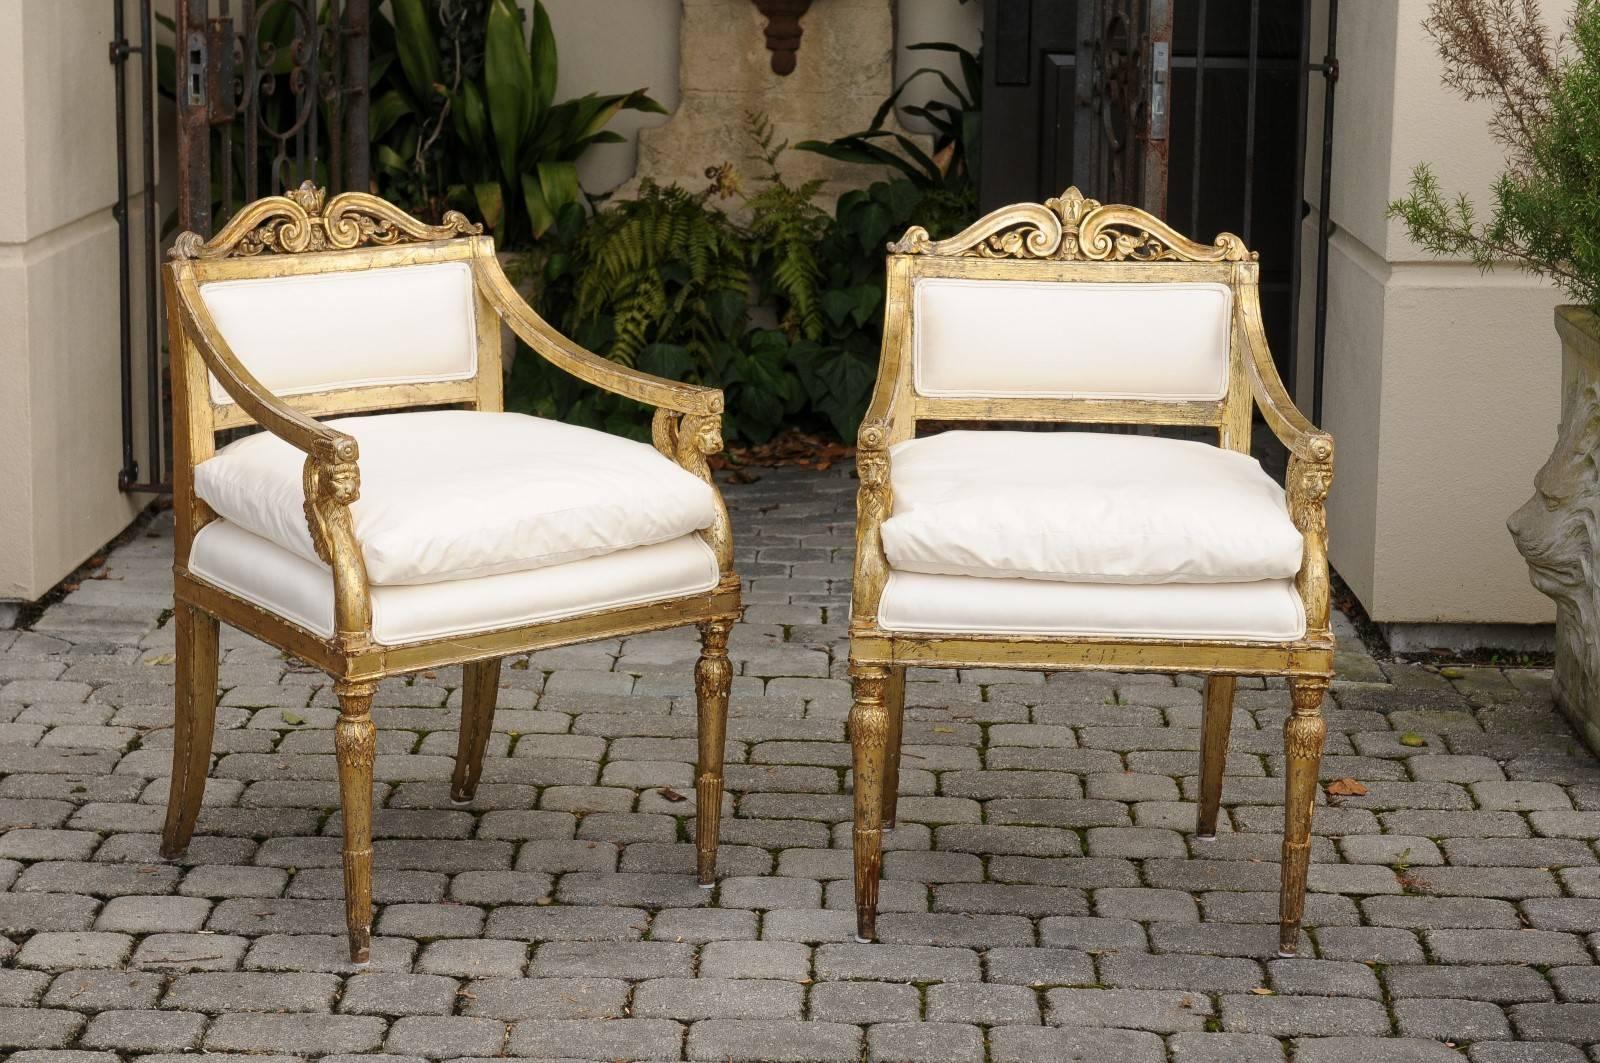 Pair of Italian neoclassical giltwood upholstered armchairs with winged lion motifs from the late 18th century. Each of this pair of Italian armchairs features a beautifully carved back adorned with a stylized fleur-de-lys, flanked with delicate